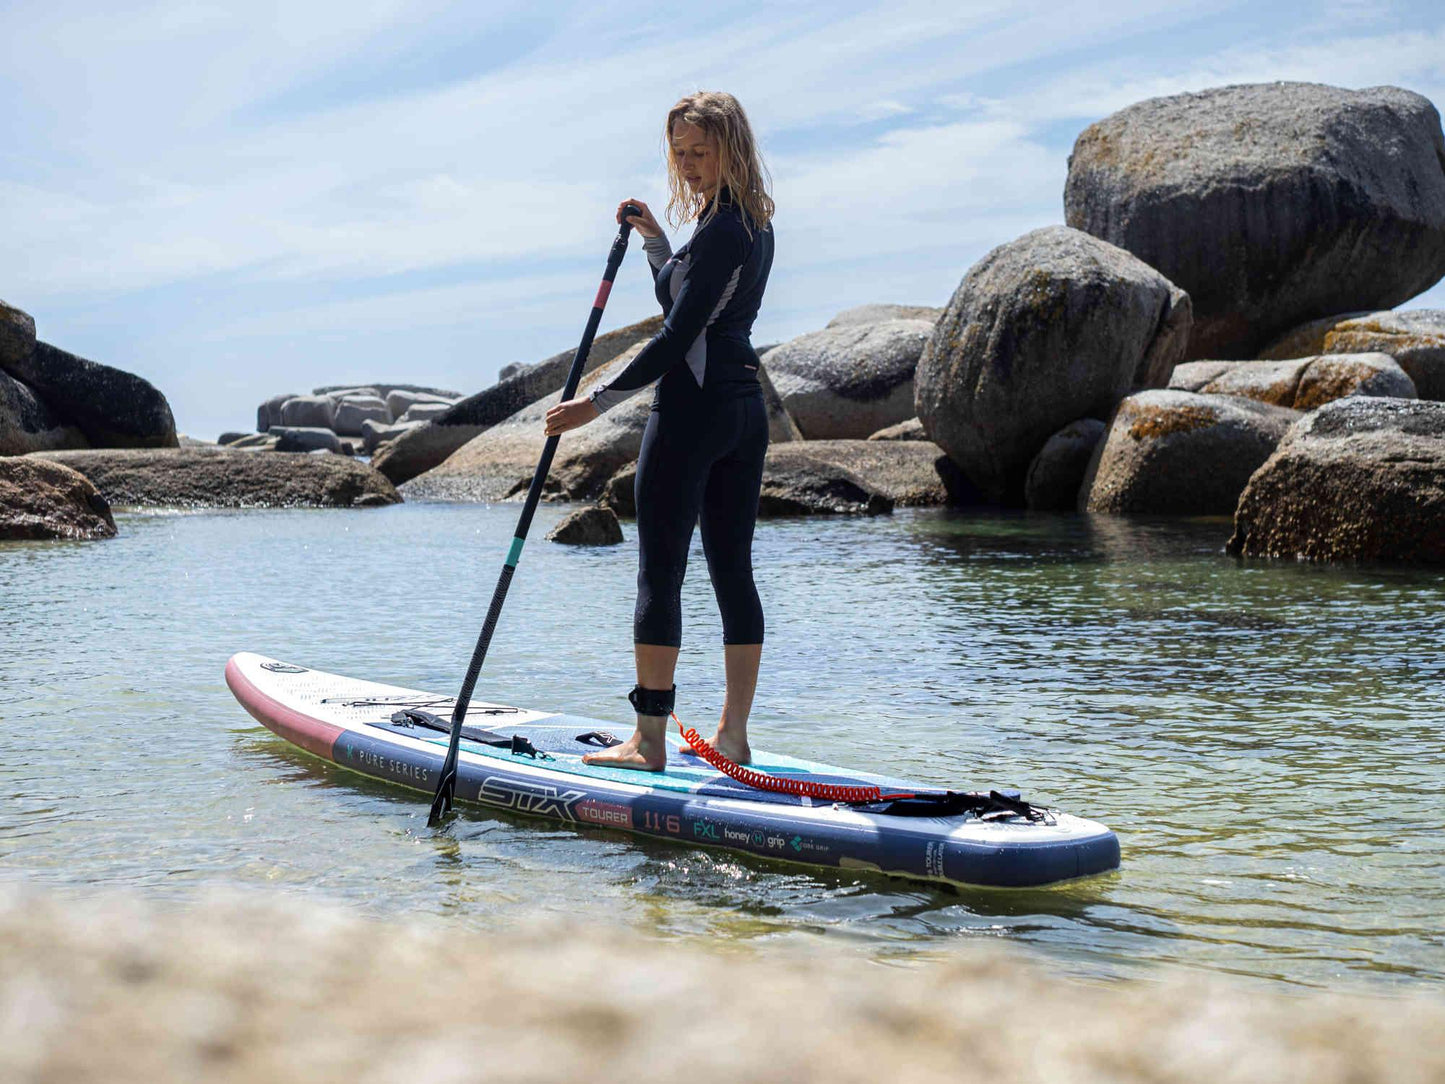 STX Pure Tourer Inflatable SUP 2022 - Poole Harbour Watersports